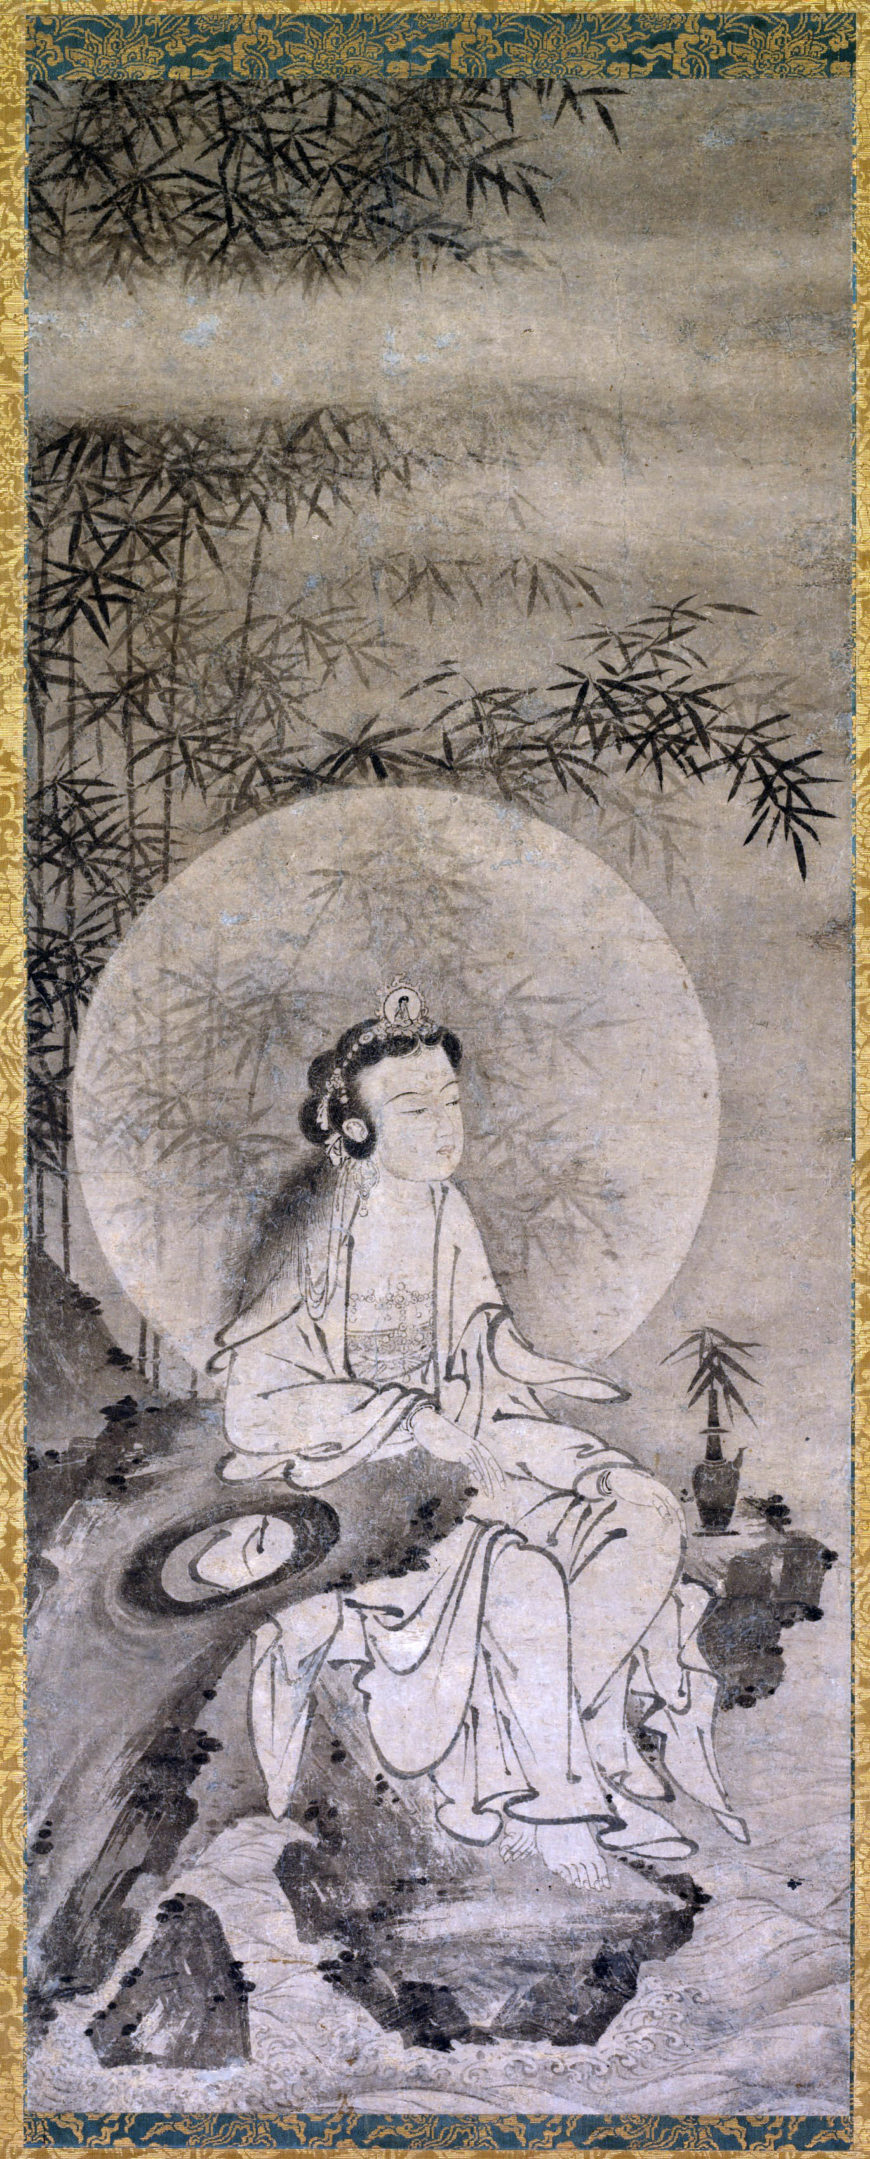 Zhang Yuehu (張月壺), White-Robed Guanyin (白衣觀音), late 1200s, hanging scroll, ink on paper, 104 x 42.3 cm. (The Cleveland Museum of Art)